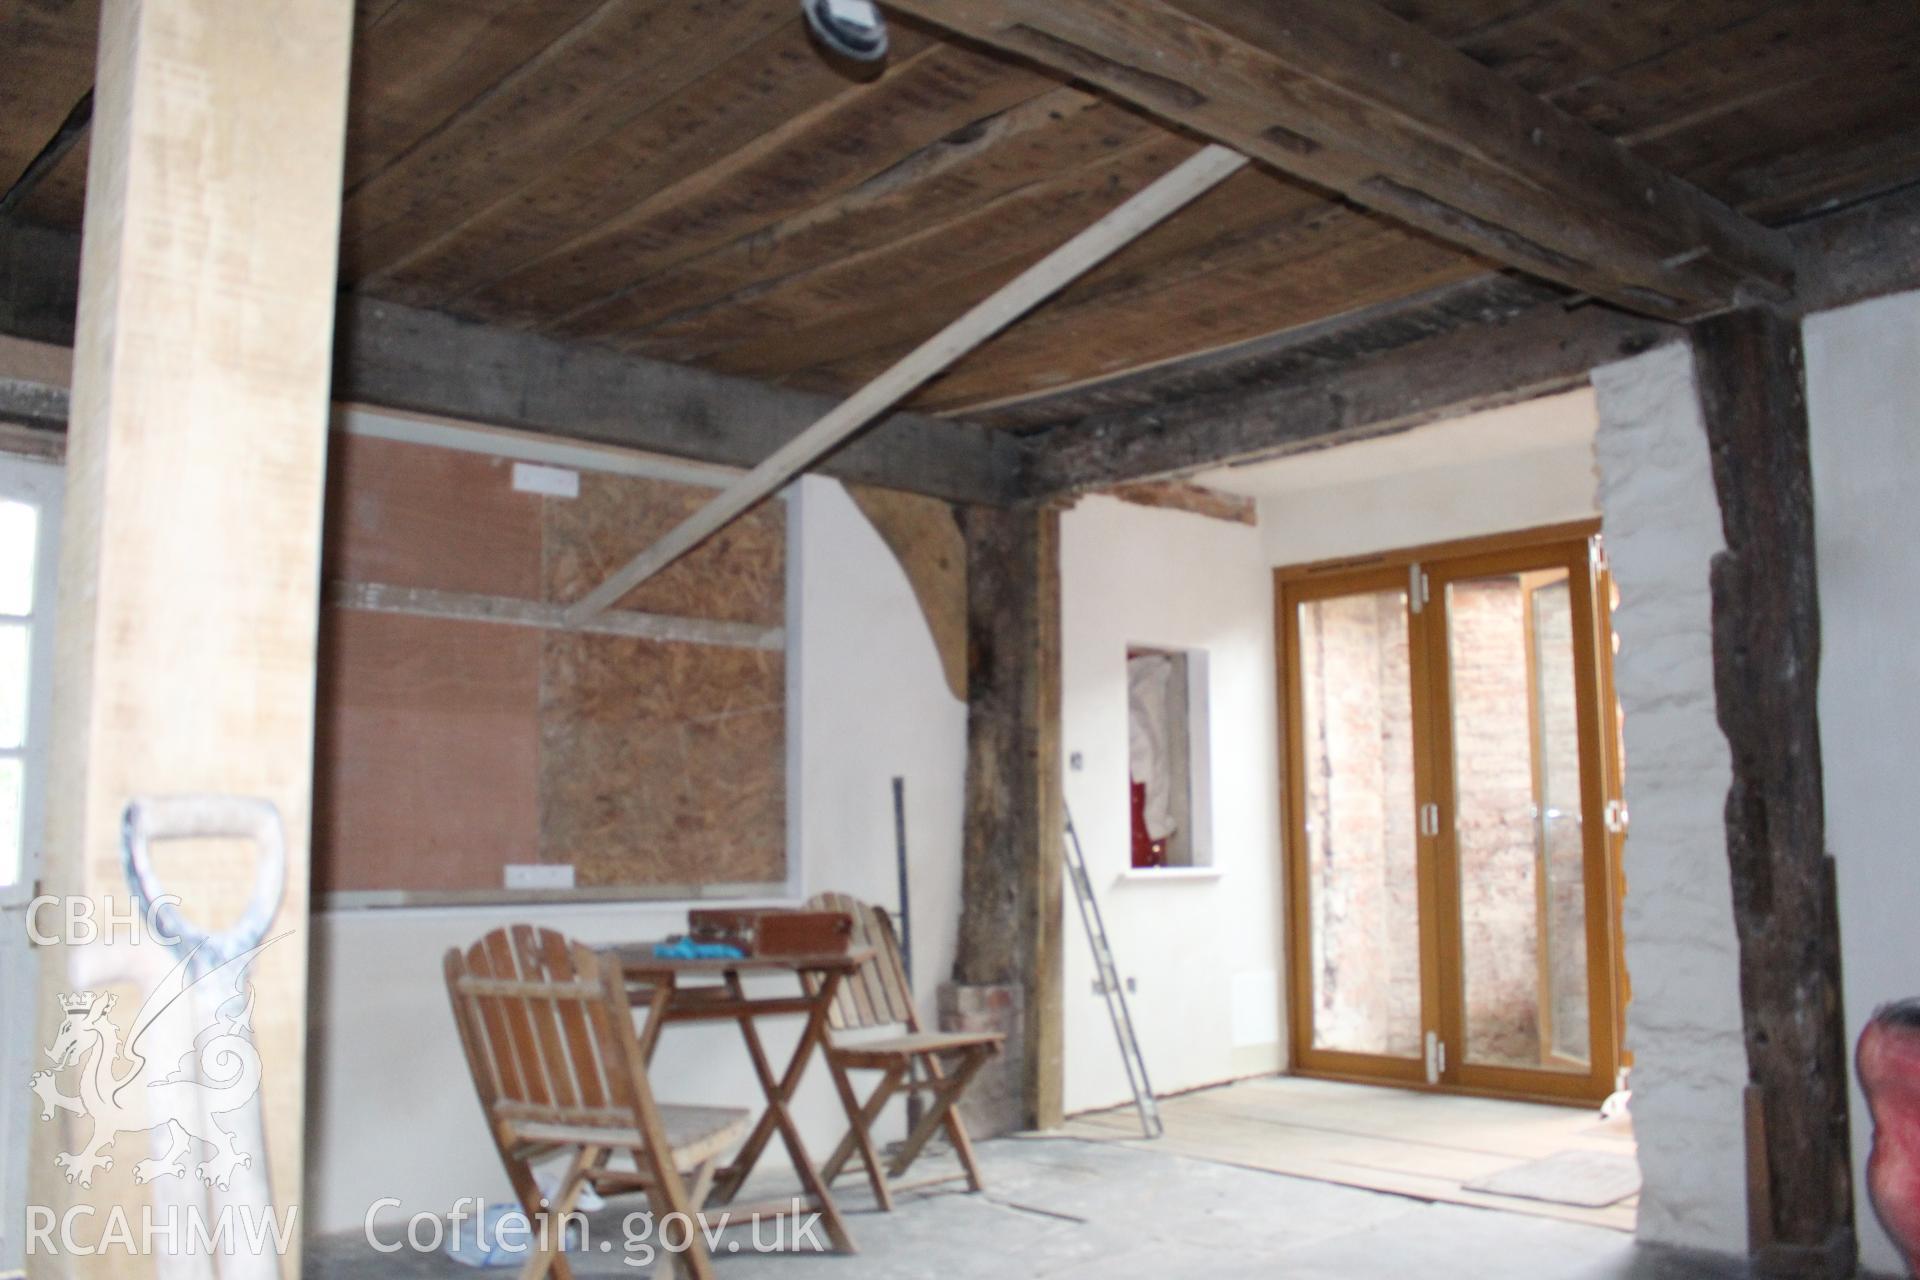 Colour photograph showing interior view of timber frame and ceiling at Porth y Dwr, Clwyd Street, Ruthin. Photograph taken during survey conducted by Geoff Ward on 9th October 2014.